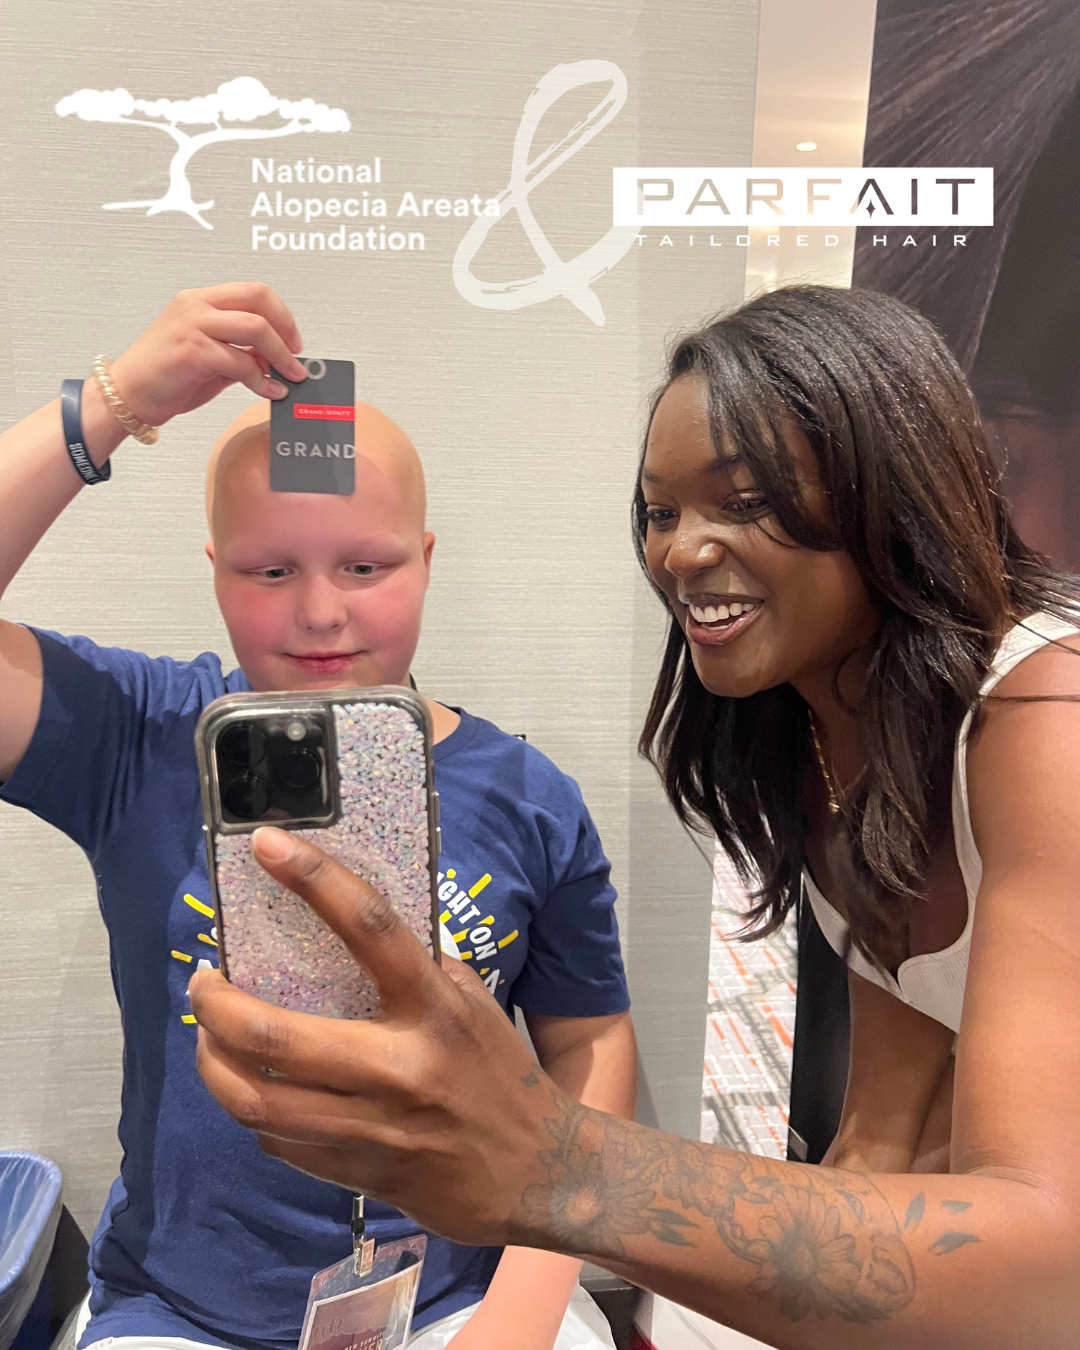 Parfait's Impactful Moments at the 38th Annual National Alopecia Areata Foundation Conference